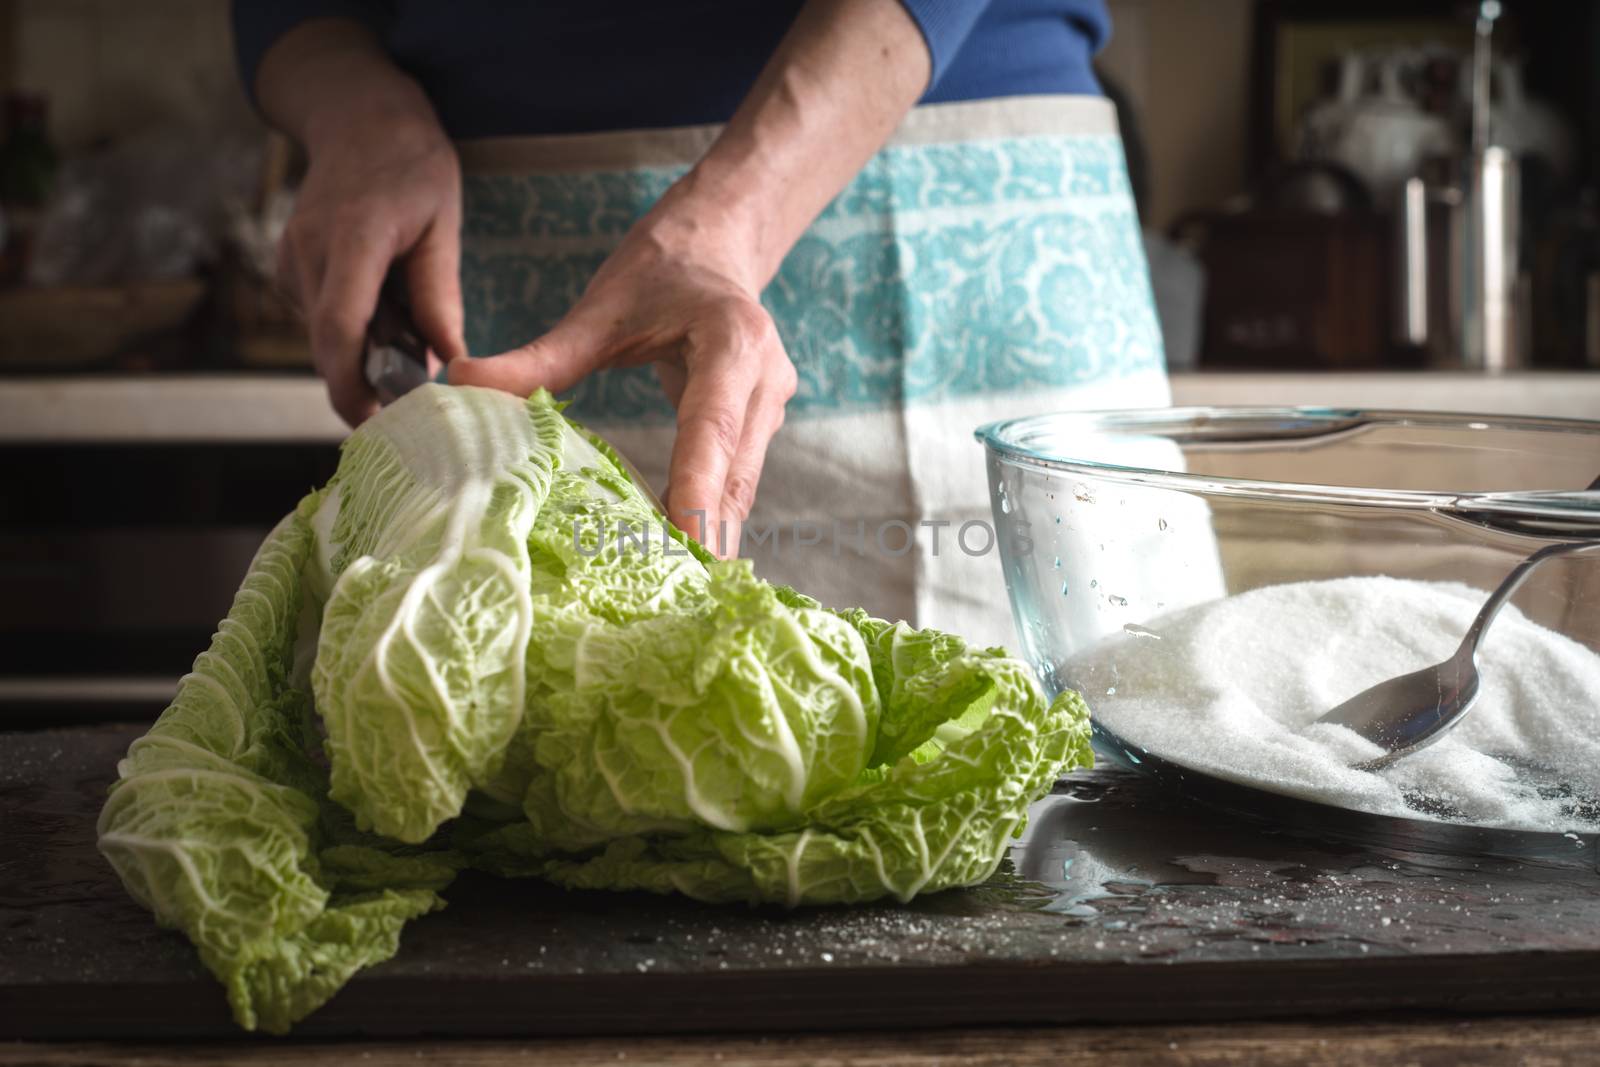 Woman cut Chinese cabbage to cook kimchi by Deniskarpenkov